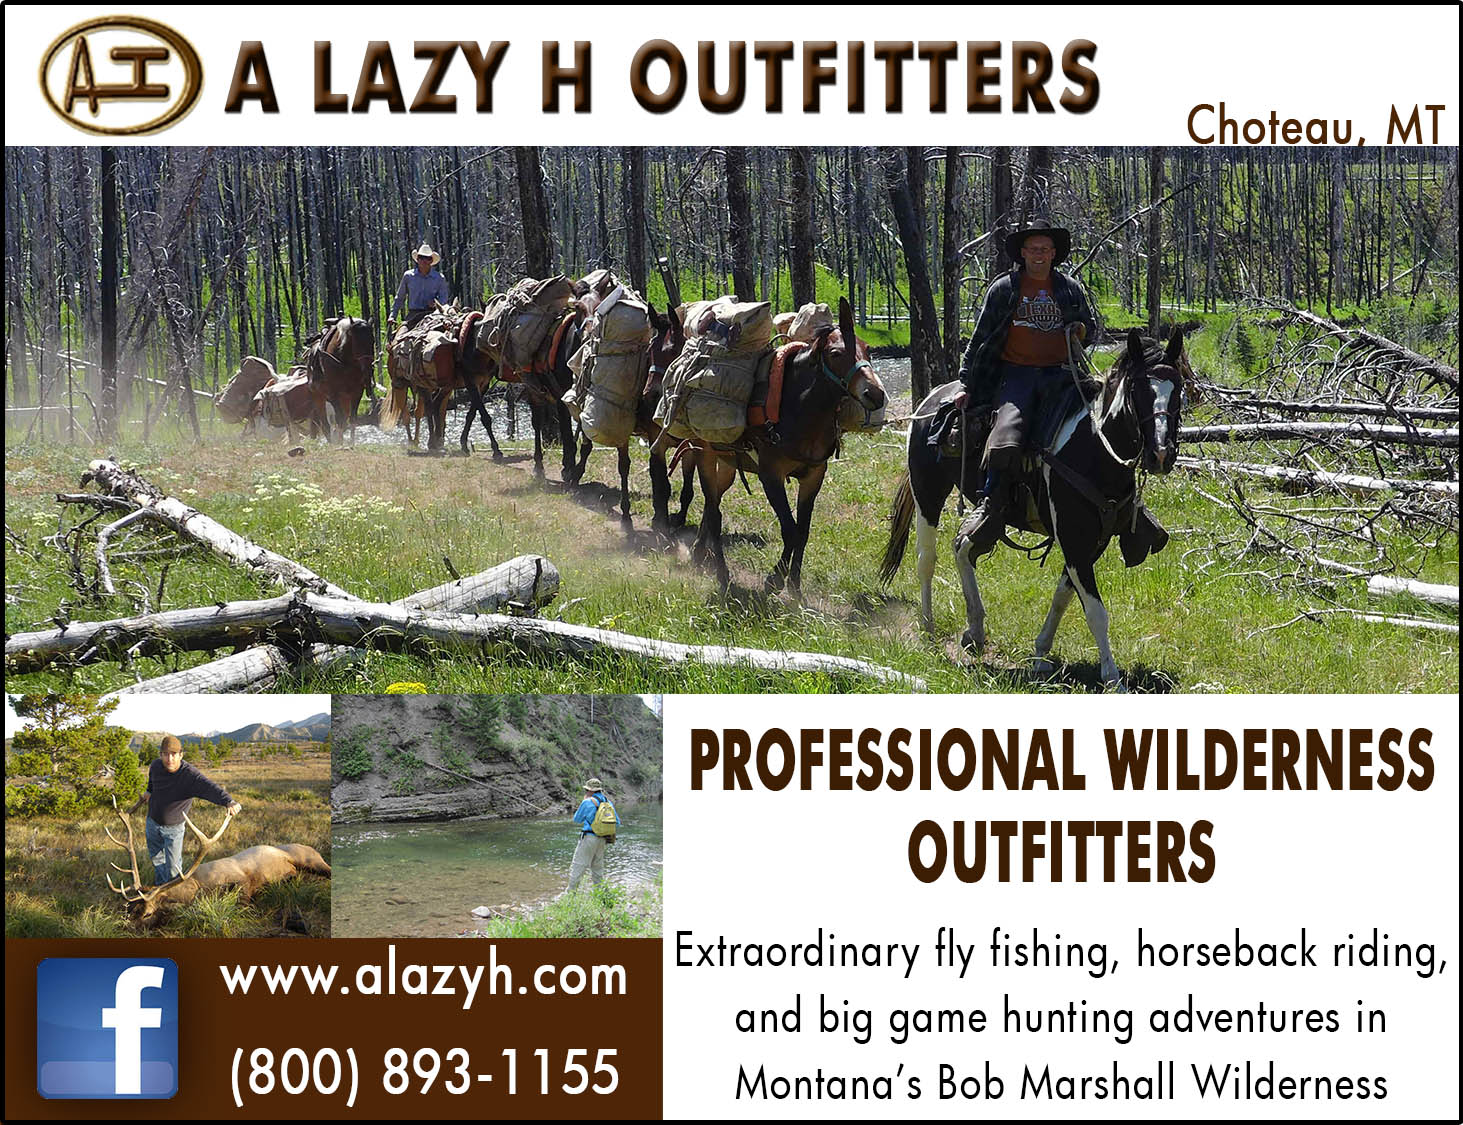 A Lazy H Outfitters